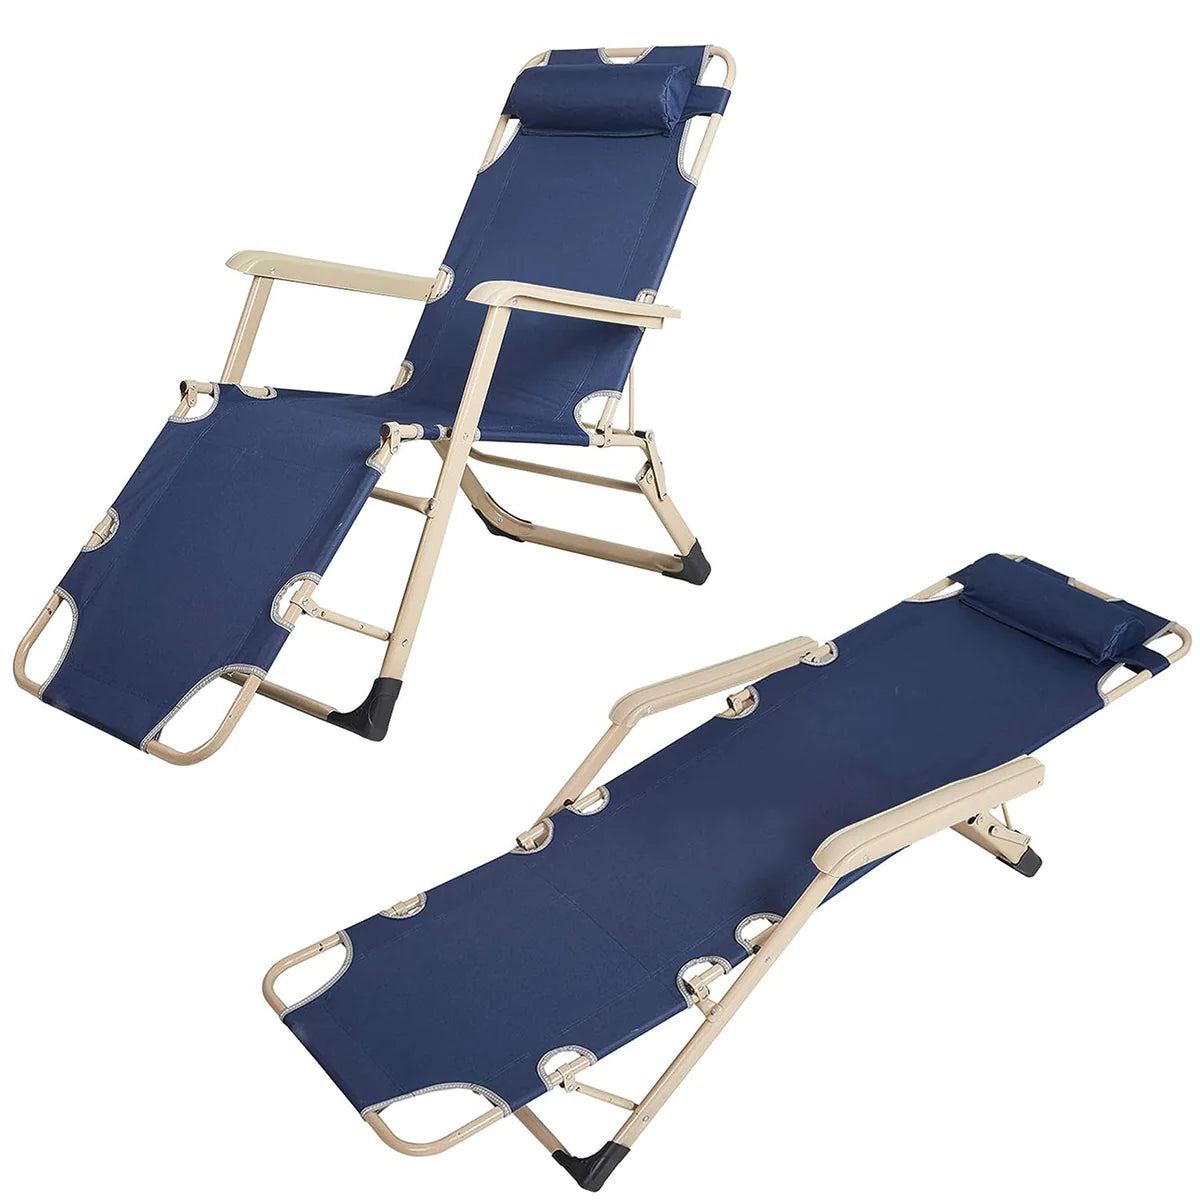 2 Sets of Collapsible Lounge Chair Outdoor Pool Lounge Chair